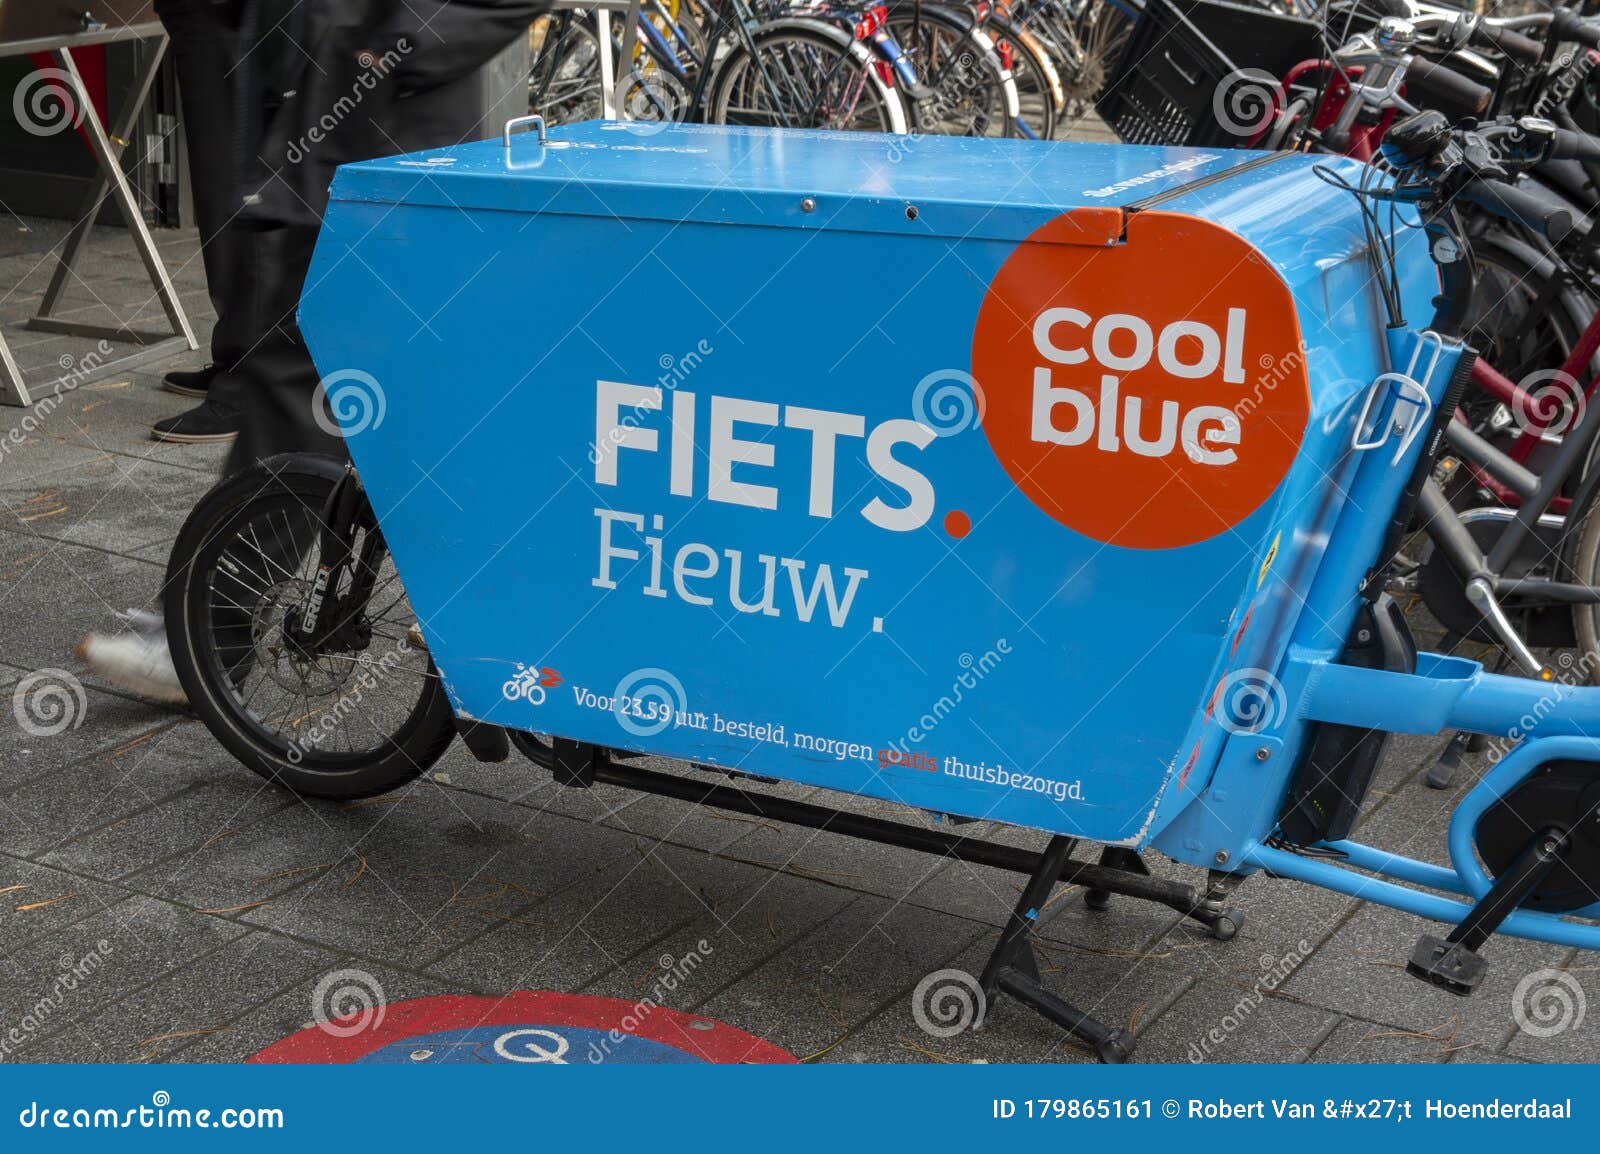 Corporation schoner Barmhartig Bicycle Delivery Service from Coolblue at Amsterdam the Netherlands 2019  Editorial Photo - Image of blue, outdoors: 179865161